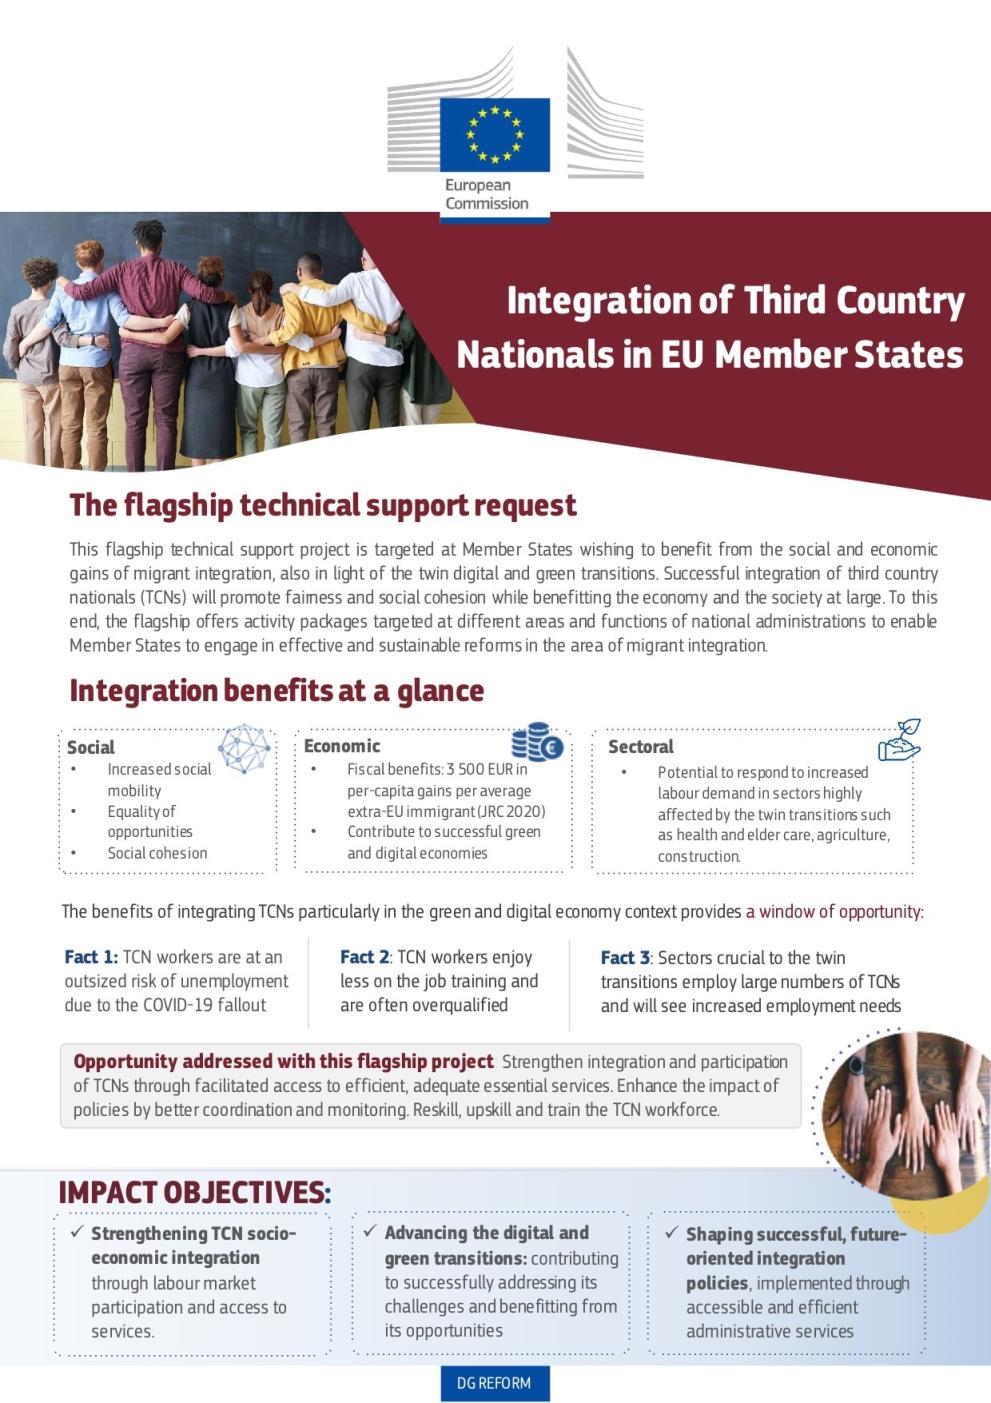 Integration of Third Country Nationals in EU Member States